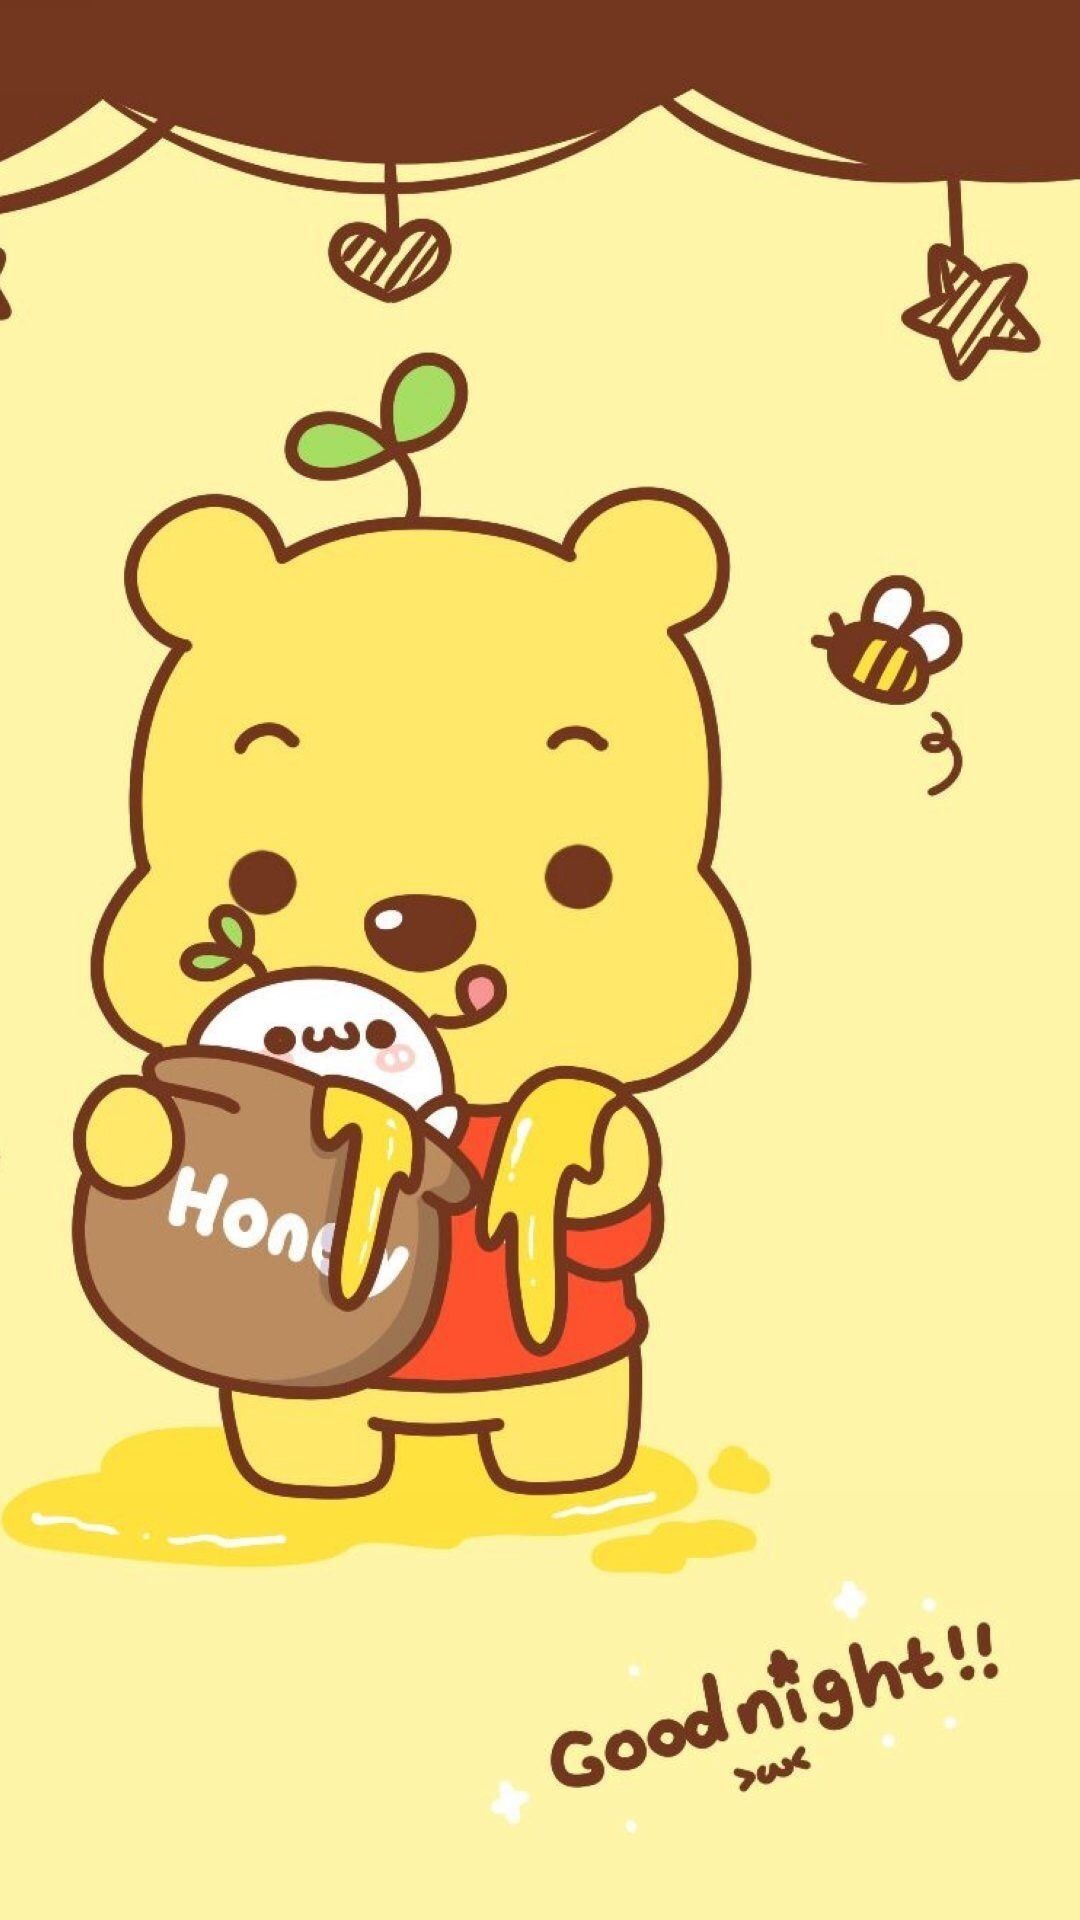 Winnie the Pooh iPhone Wallpaper with high-resolution 1080x1920 pixel. You can use this wallpaper for your iPhone 5, 6, 7, 8, X, XS, XR backgrounds, Mobile Screensaver, or iPad Lock Screen - Winnie the Pooh, kawaii, Japanese